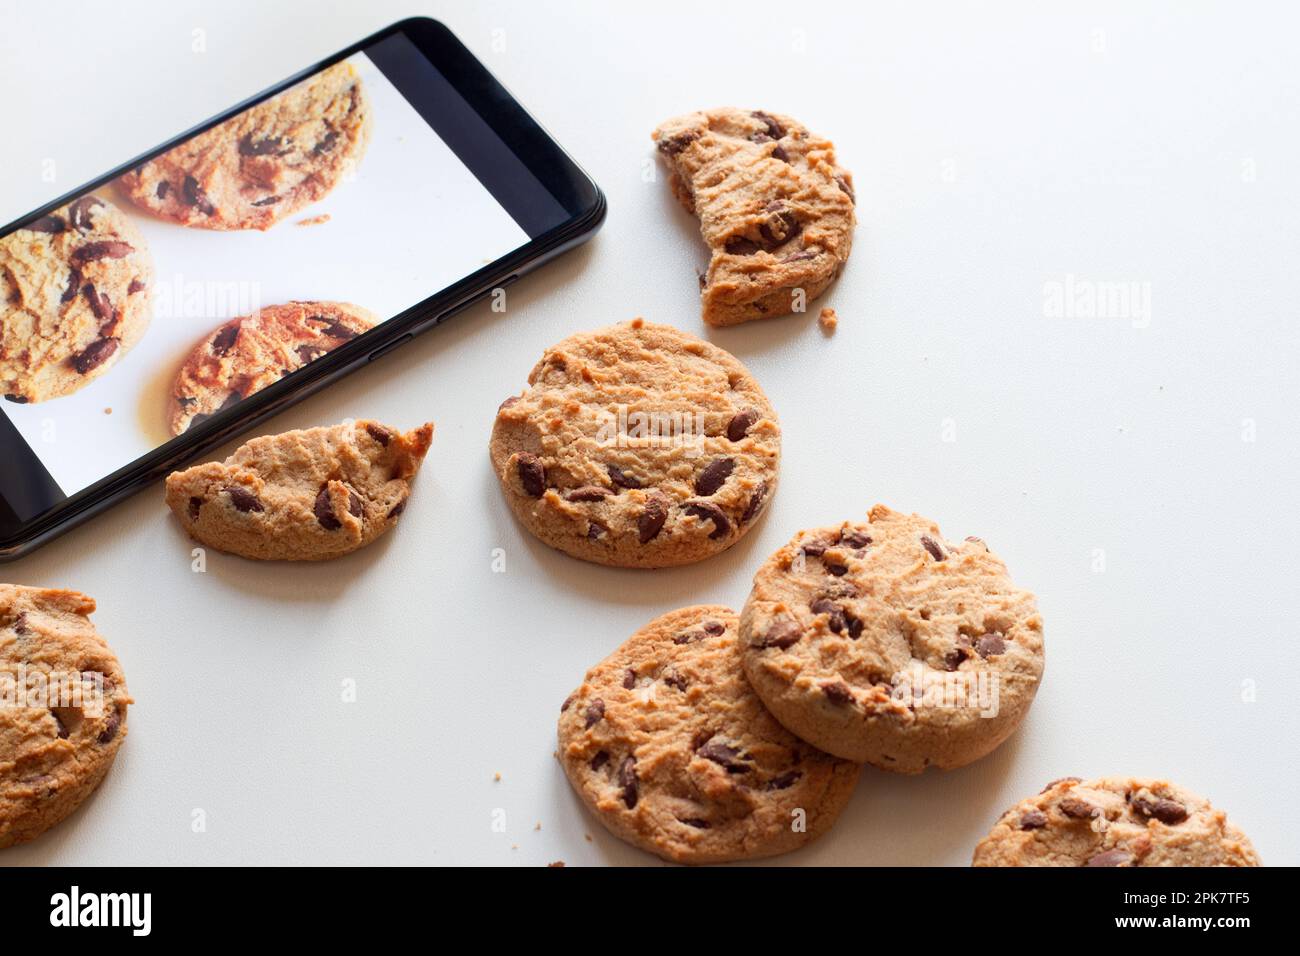 Pop-up cookies from smartphone concept Stock Photo